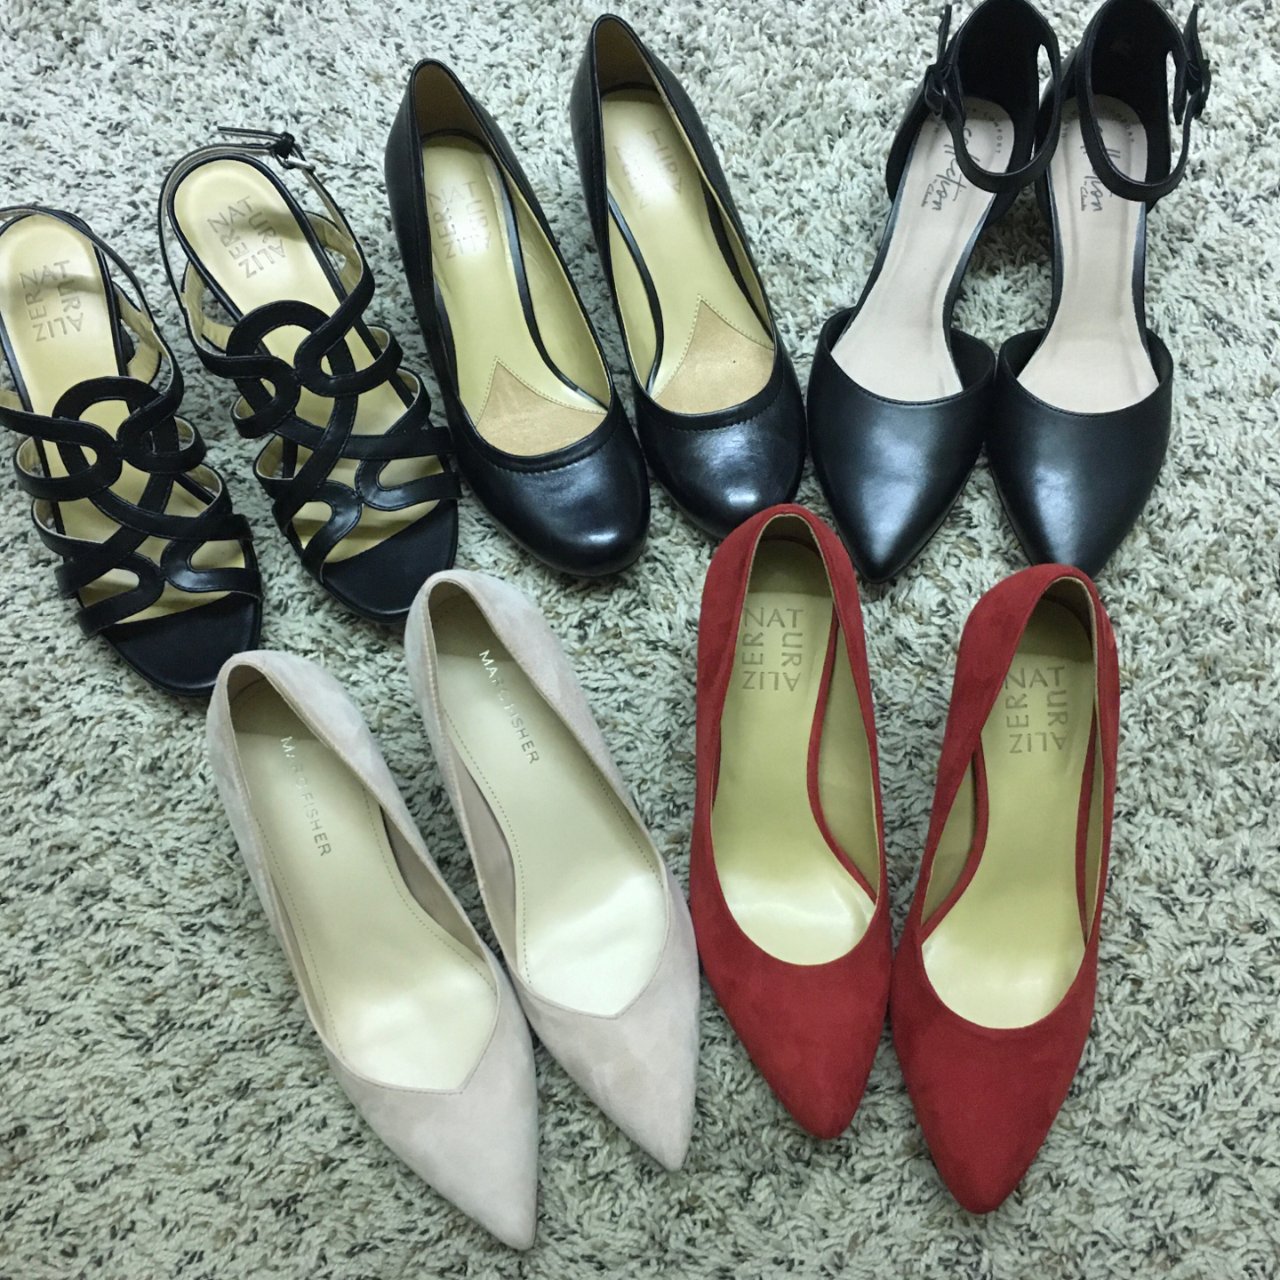 dsw,Naturalizer 娜然,Marc Fisher,Clarks,Naturalizer 娜然,Naturalizer 娜然